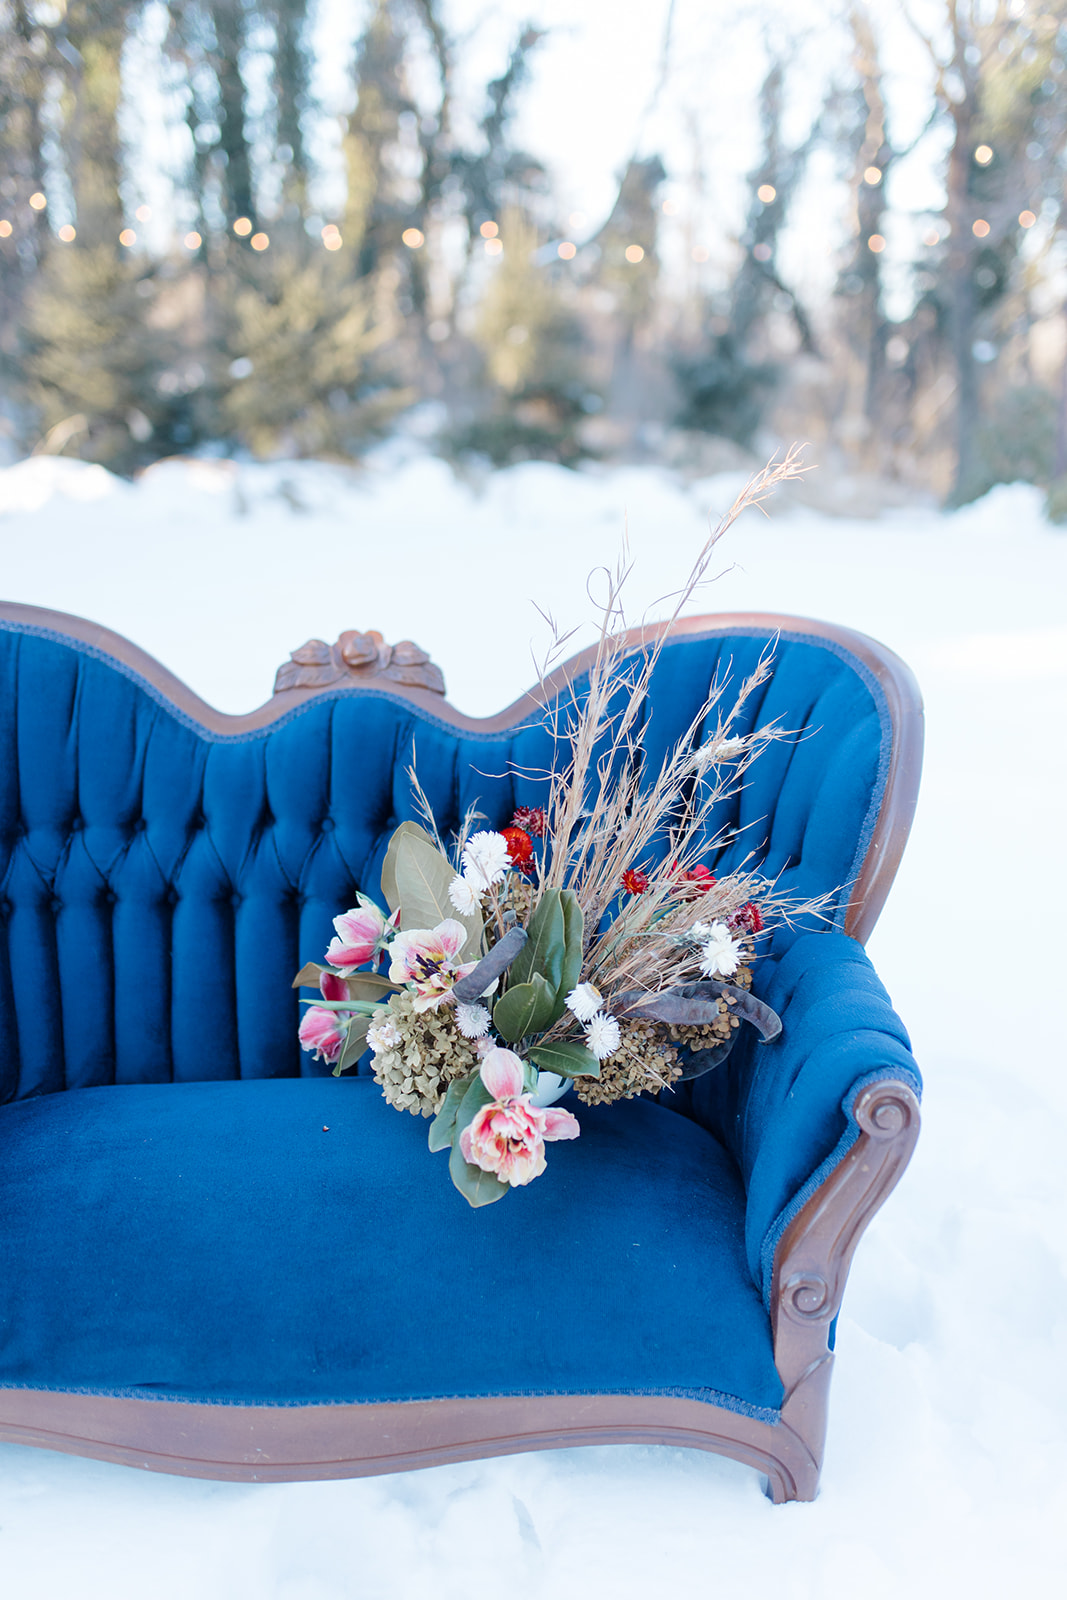 eruption Previously Advise Betty Vintage Blue Loveseat Rental - A to Z Event Rentals, LLC.